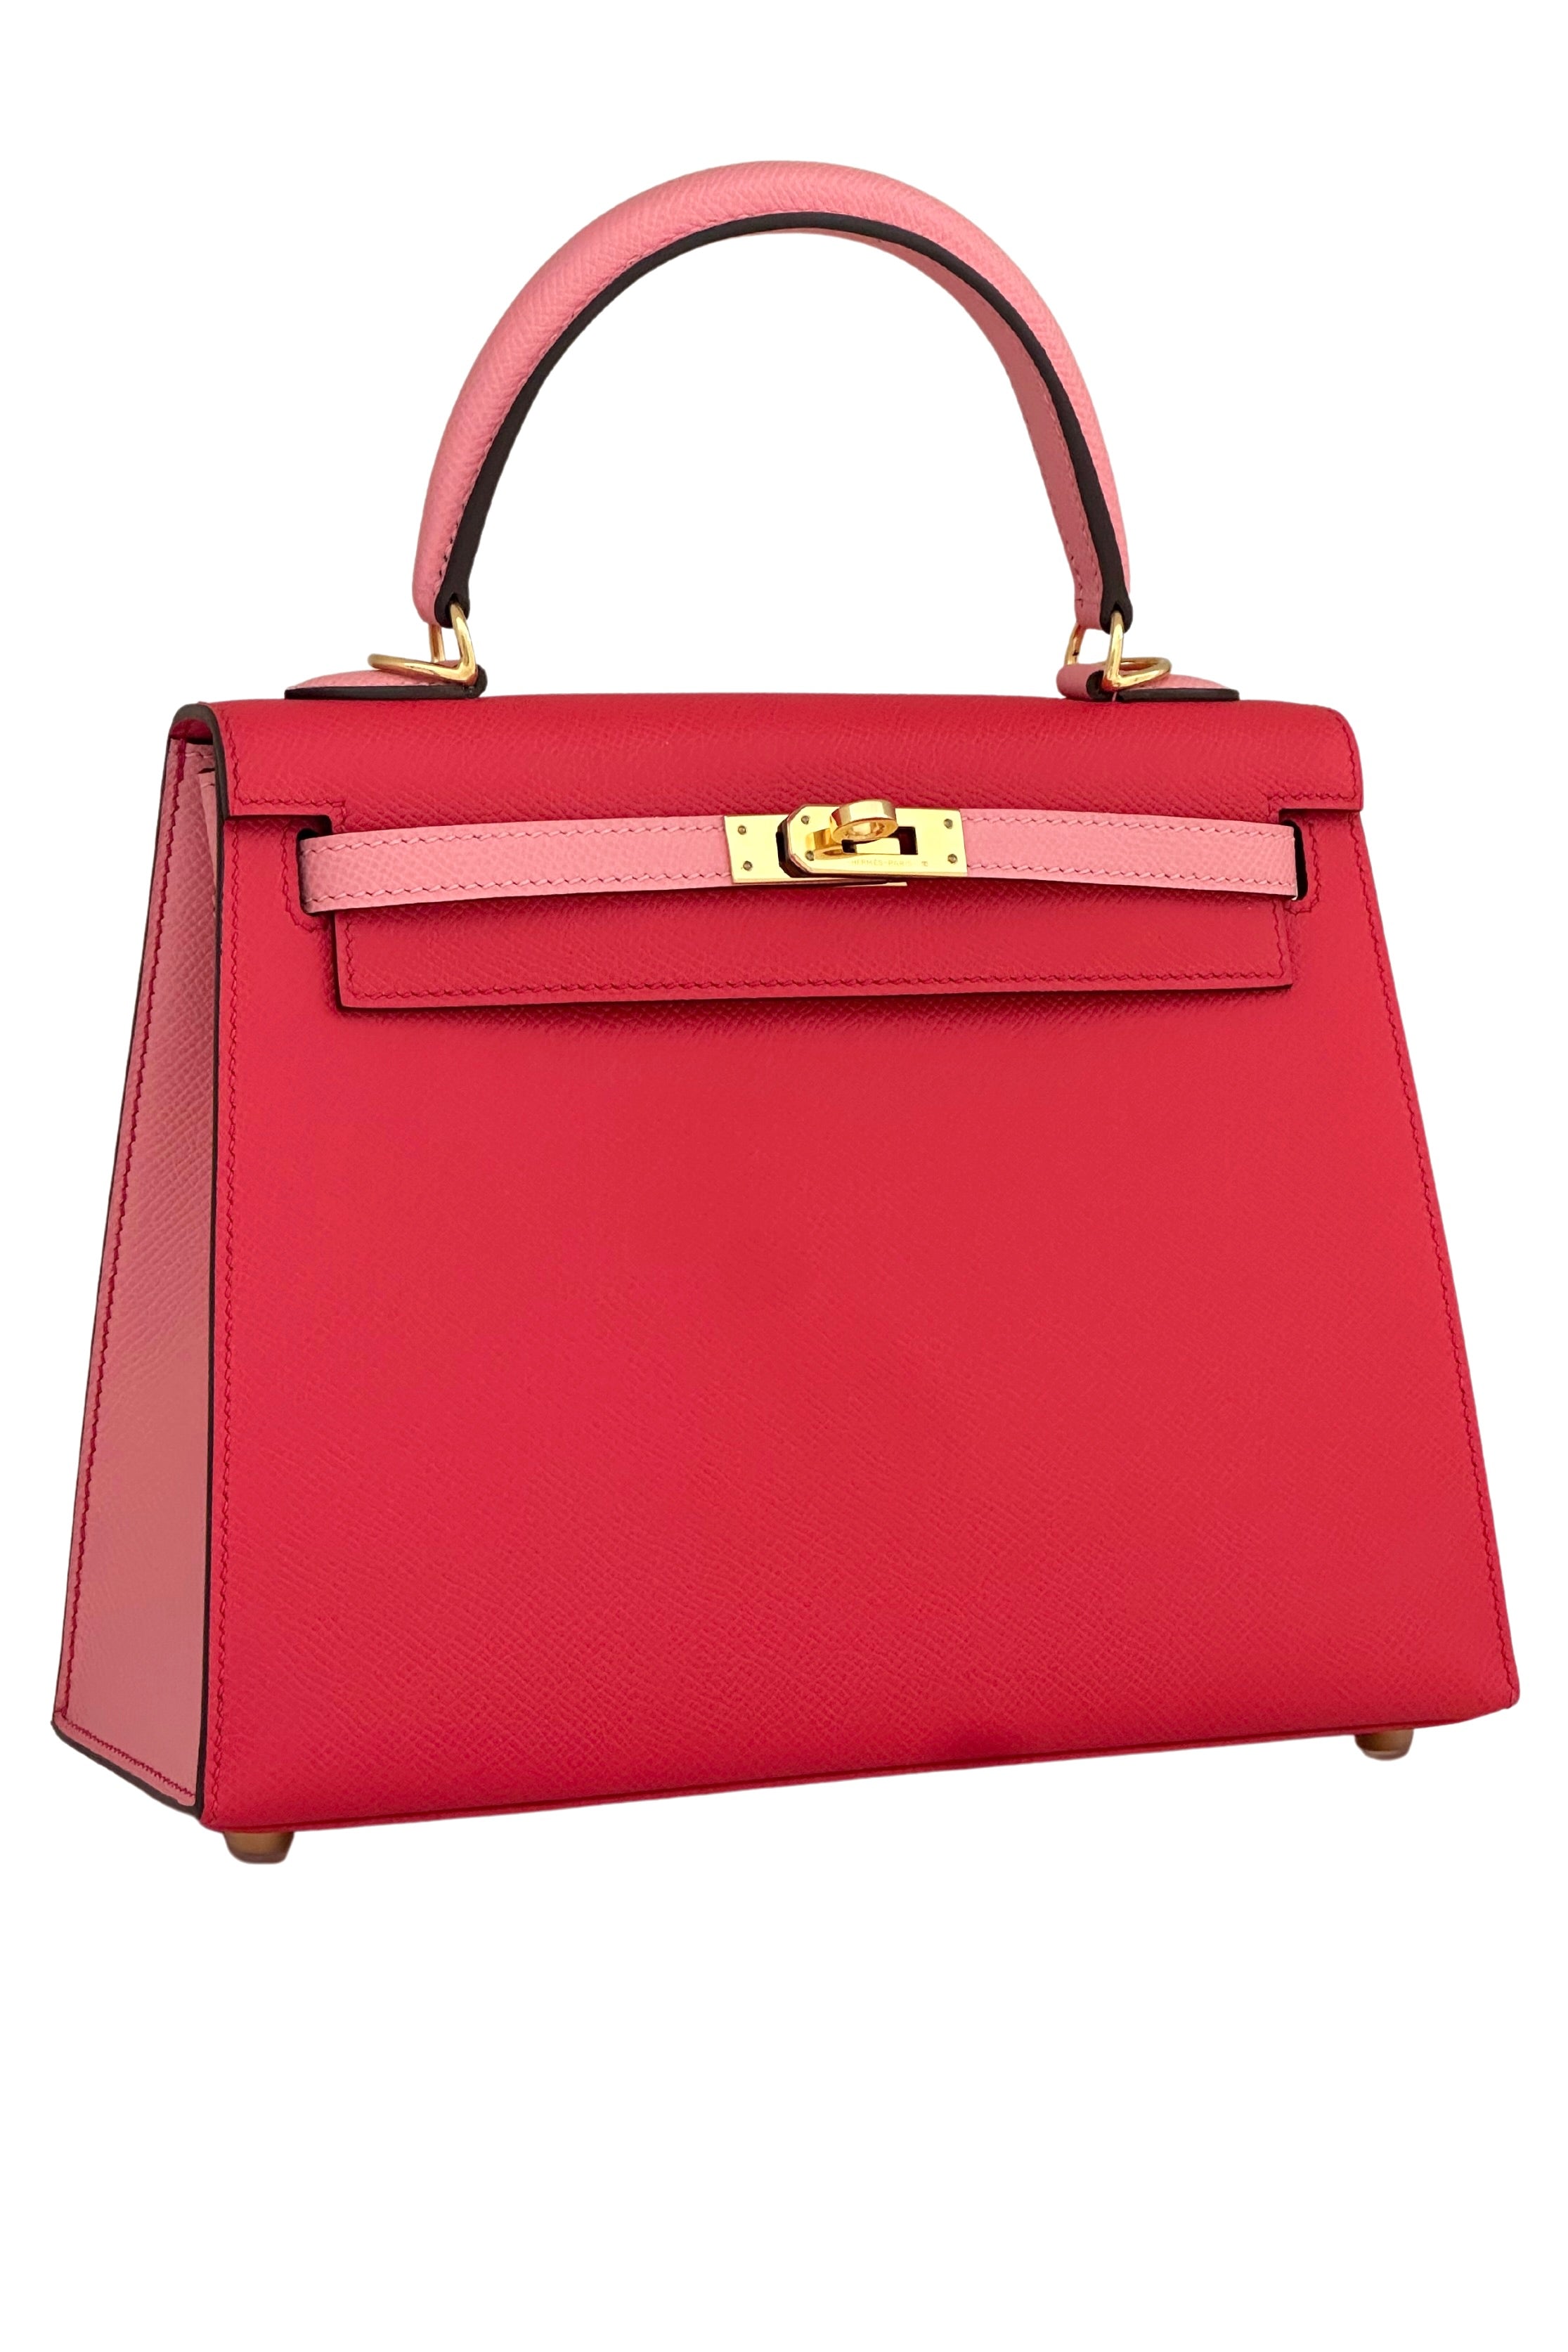 Hermès Paris <br> 2021 Custom Kelly 25 in two tone Epsom leather with Gold hardware & Horseshoe stamp